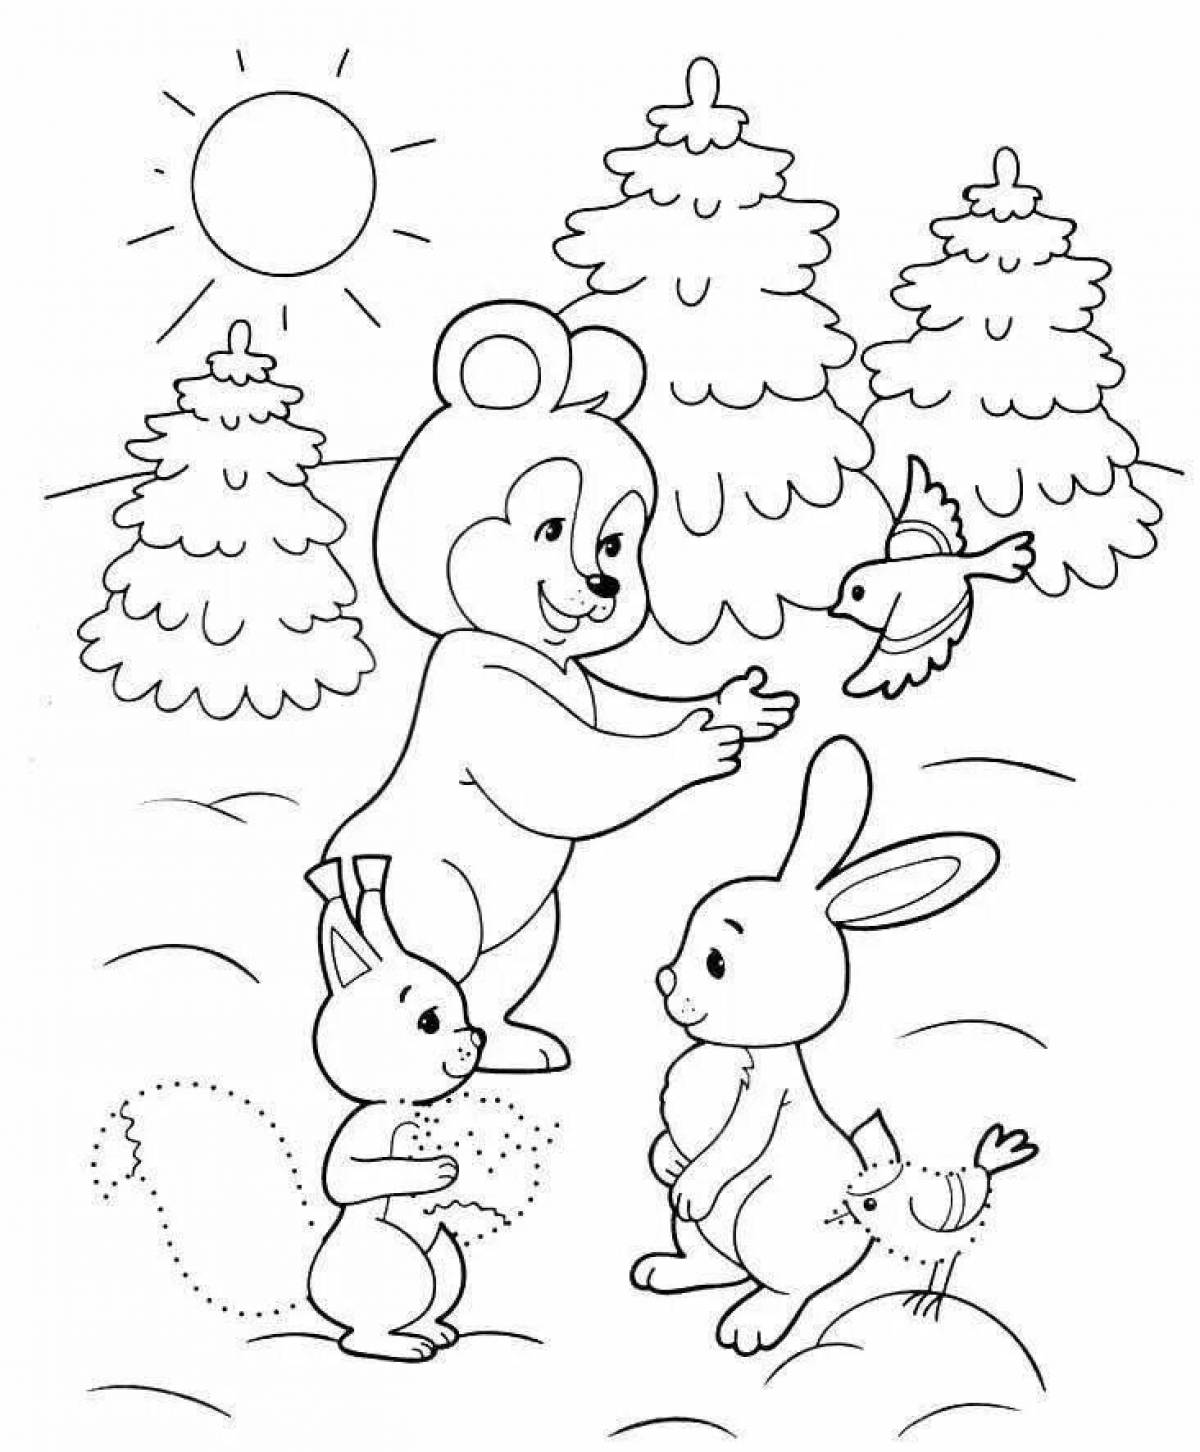 Coloring book glowing hare and snowman